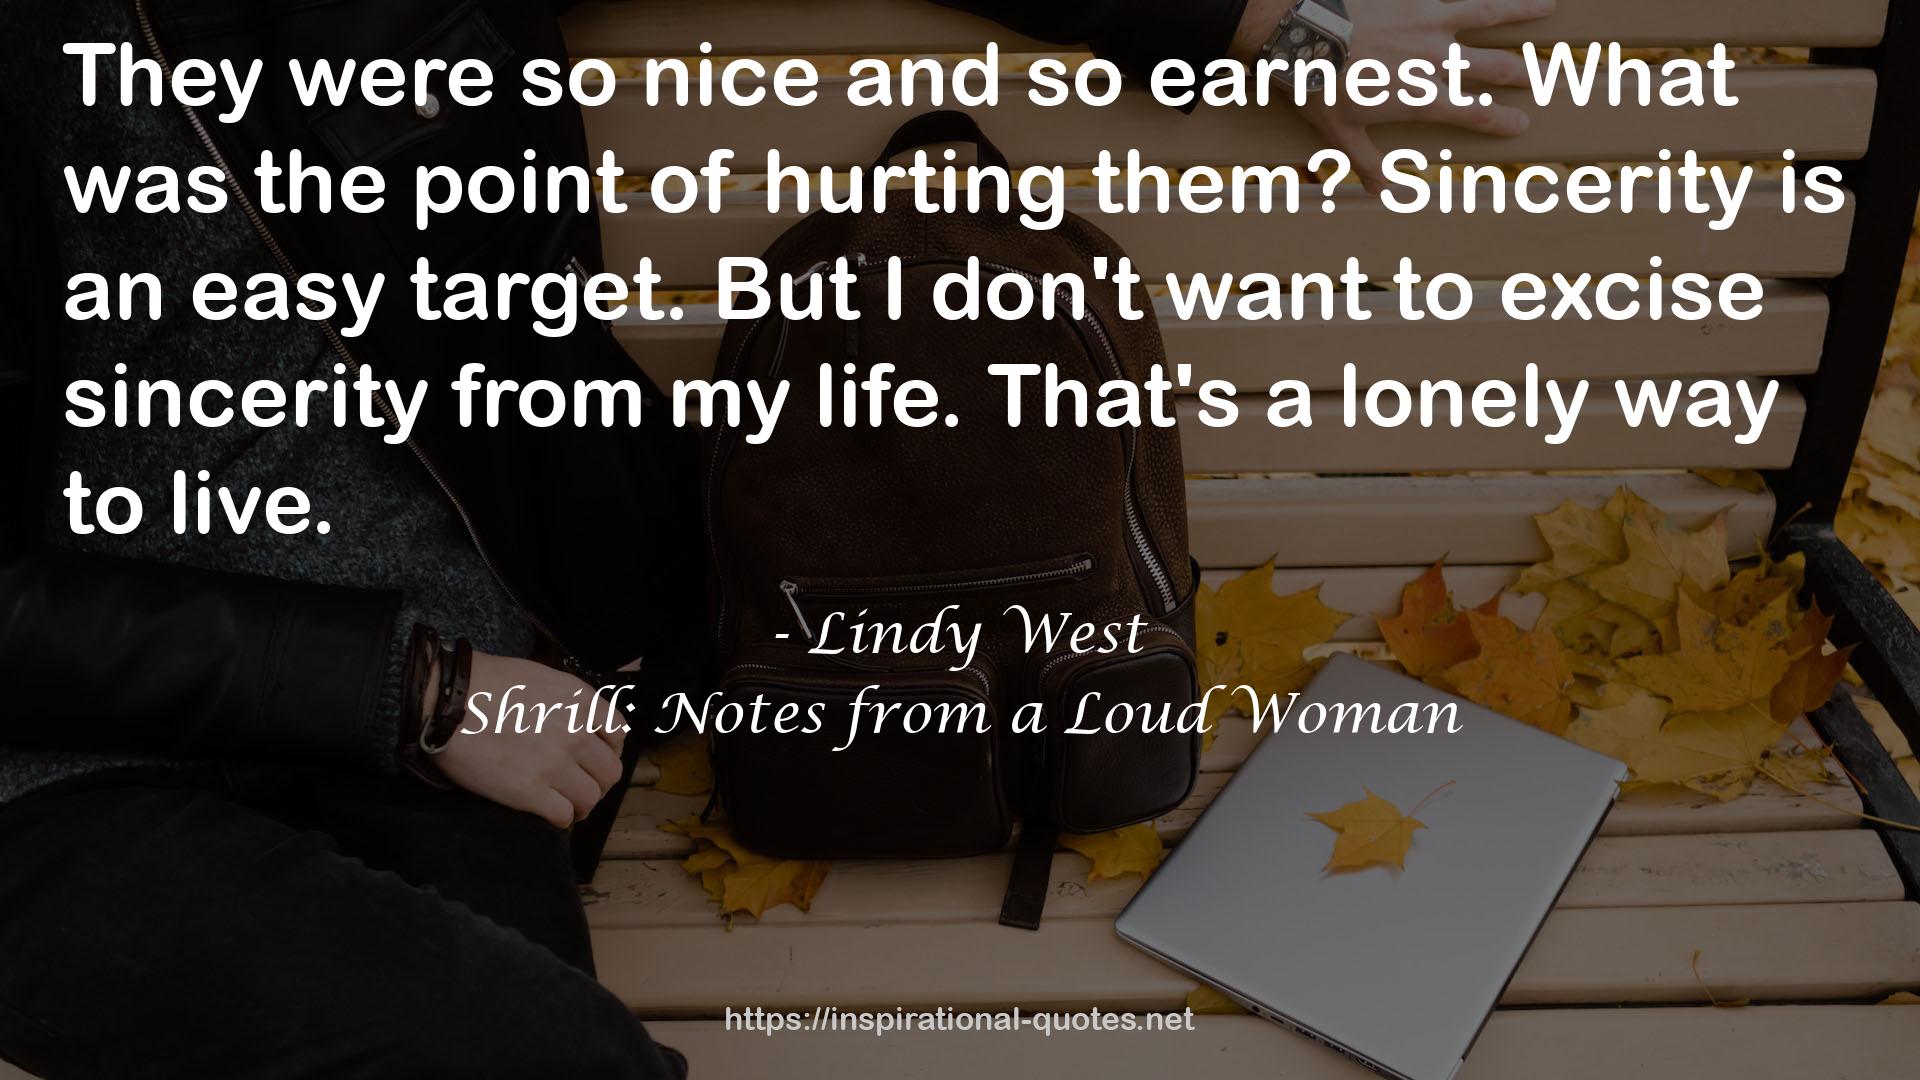 Shrill: Notes from a Loud Woman QUOTES